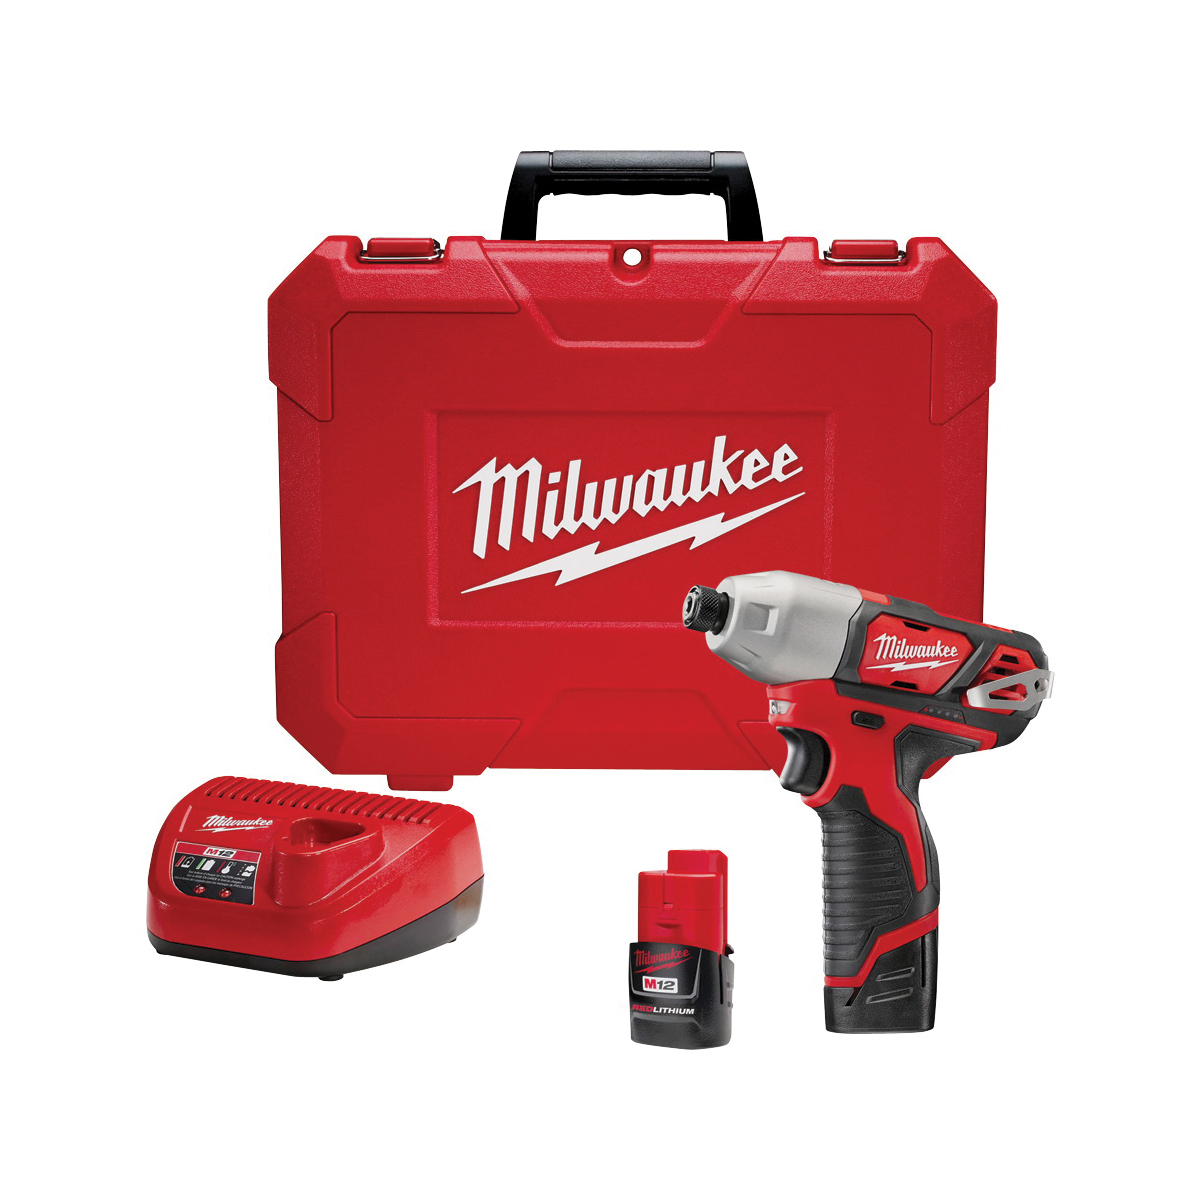 Milwaukee 2462-22 Impact Driver Kit, Battery Included, 12 V, 1.5 Ah, 1/4 in Drive, Hex Drive, 3300 ipm - 1